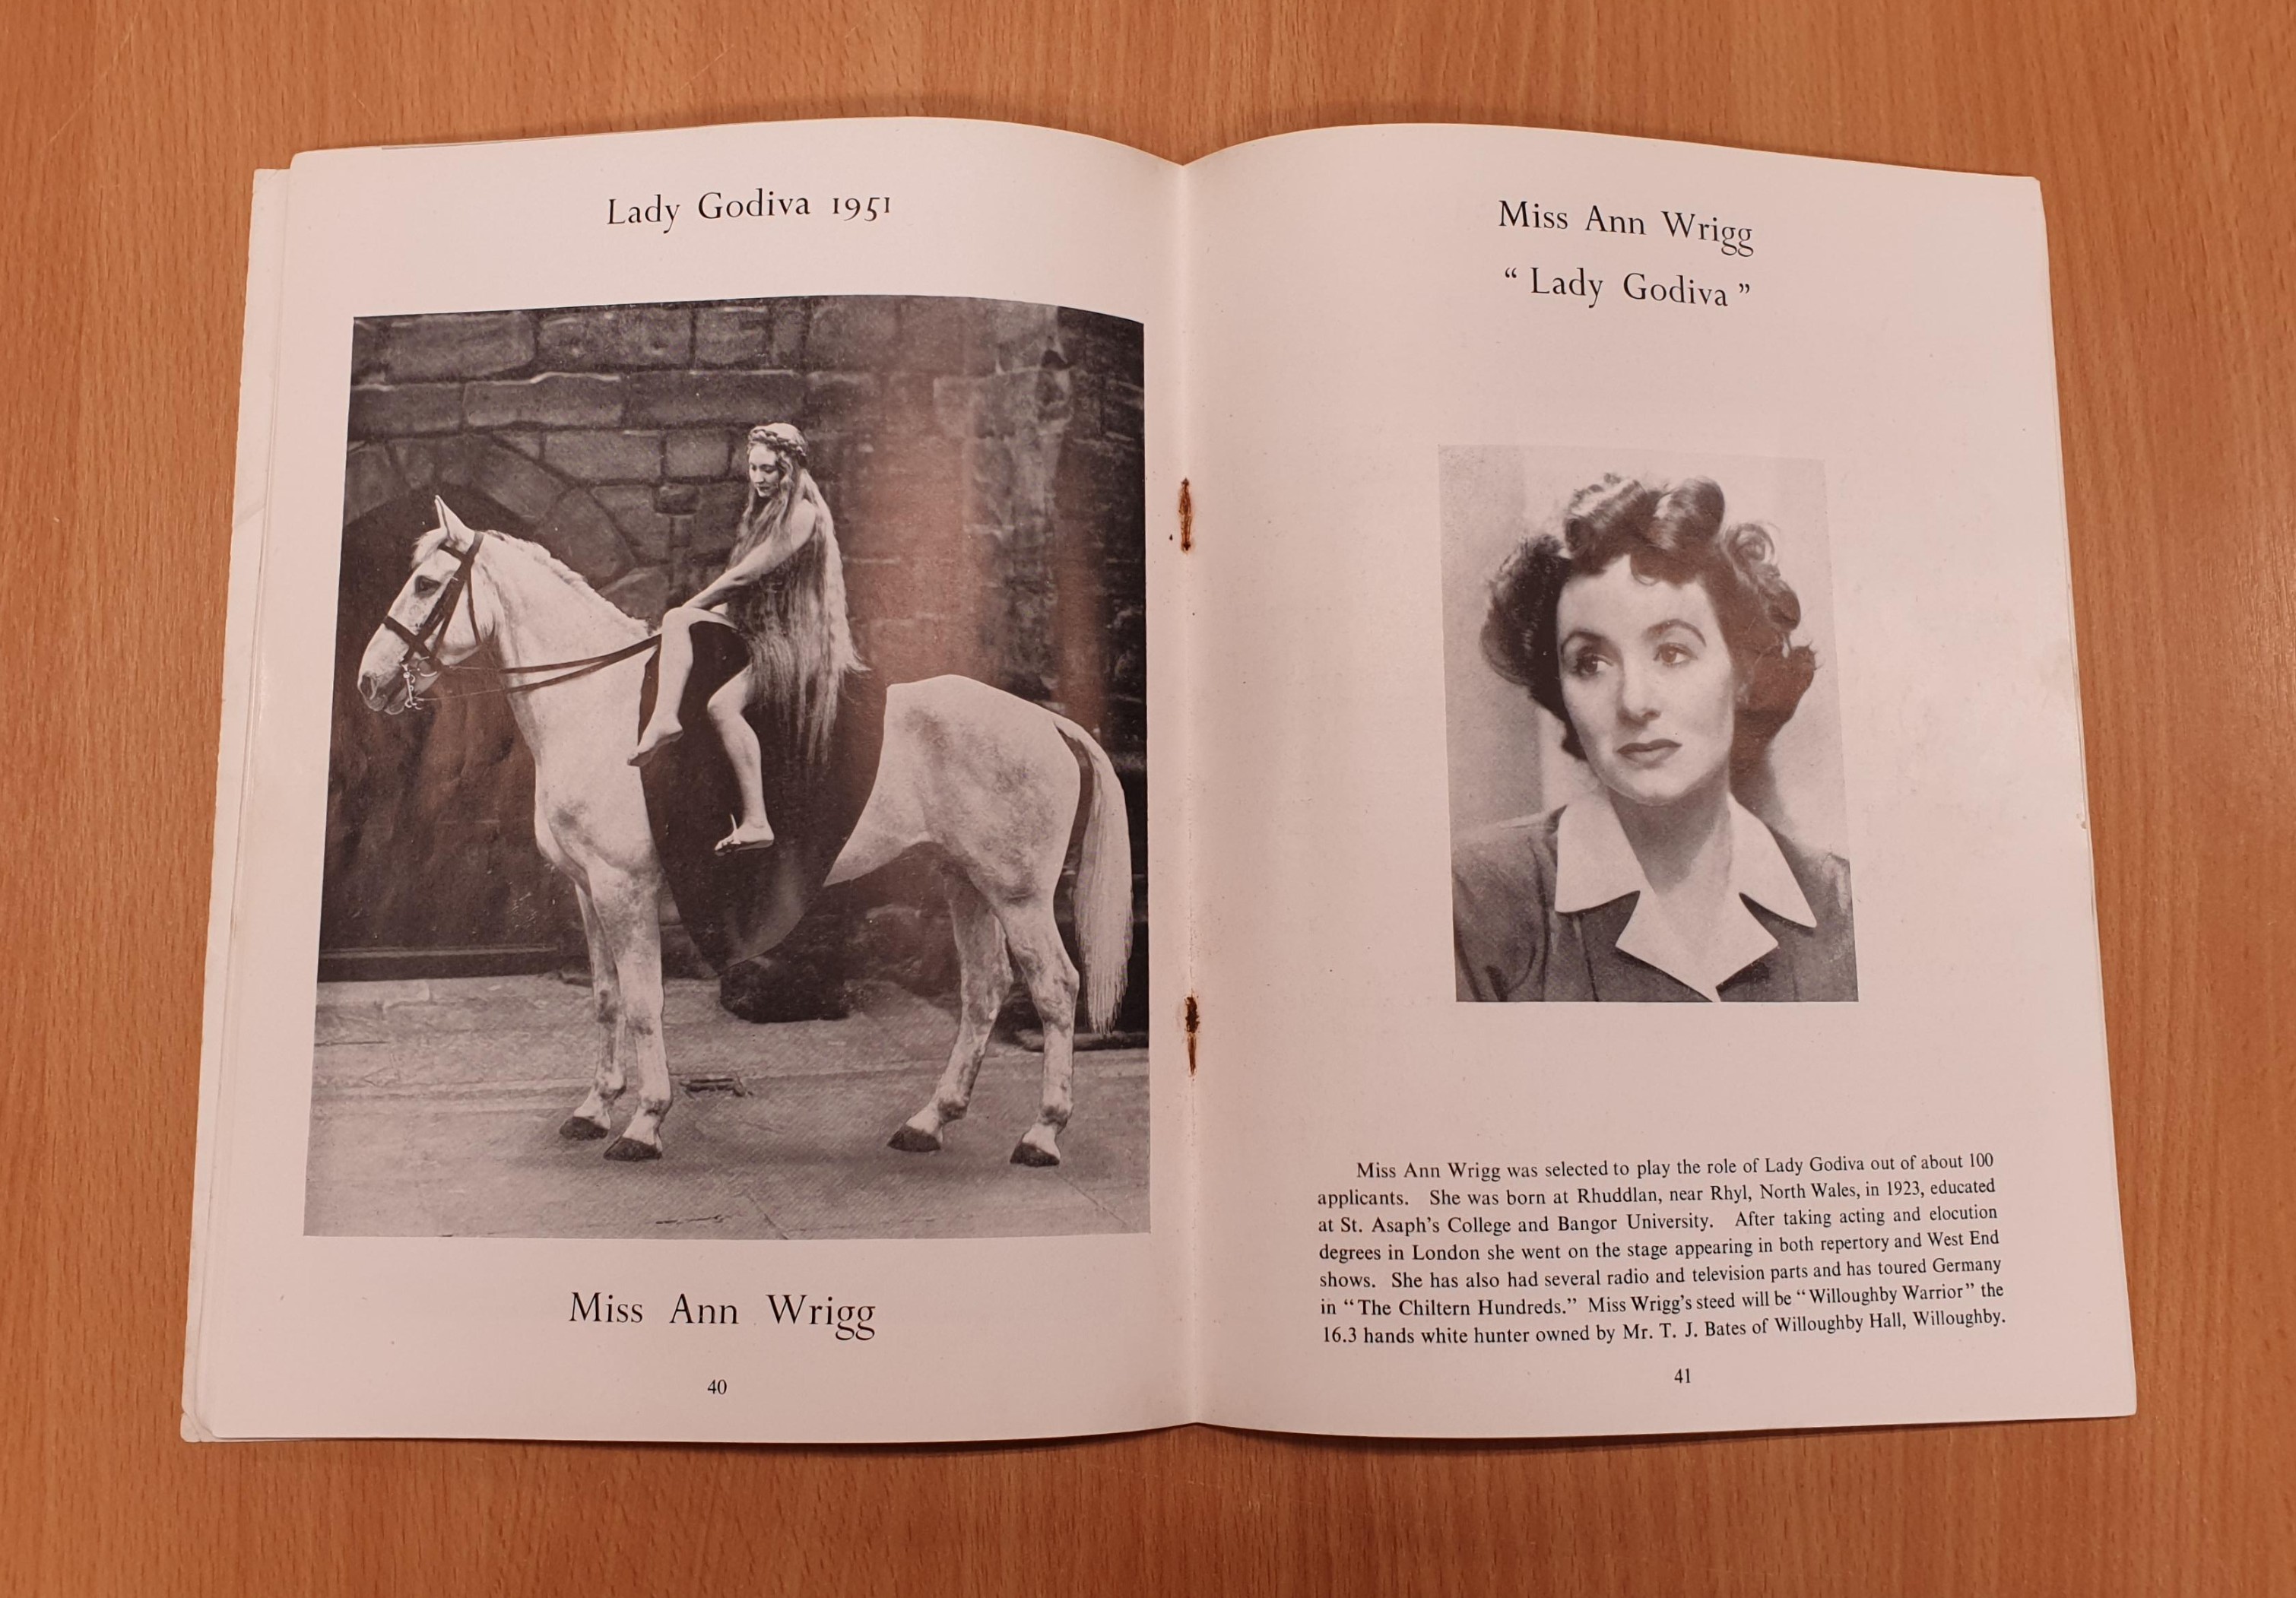 Open programme for the Festival of Britain Lady Godiva procession showing a headshot of Ann Wrigg on the right and a photo of her dressed as Lady Godiva riding a horse on the left.